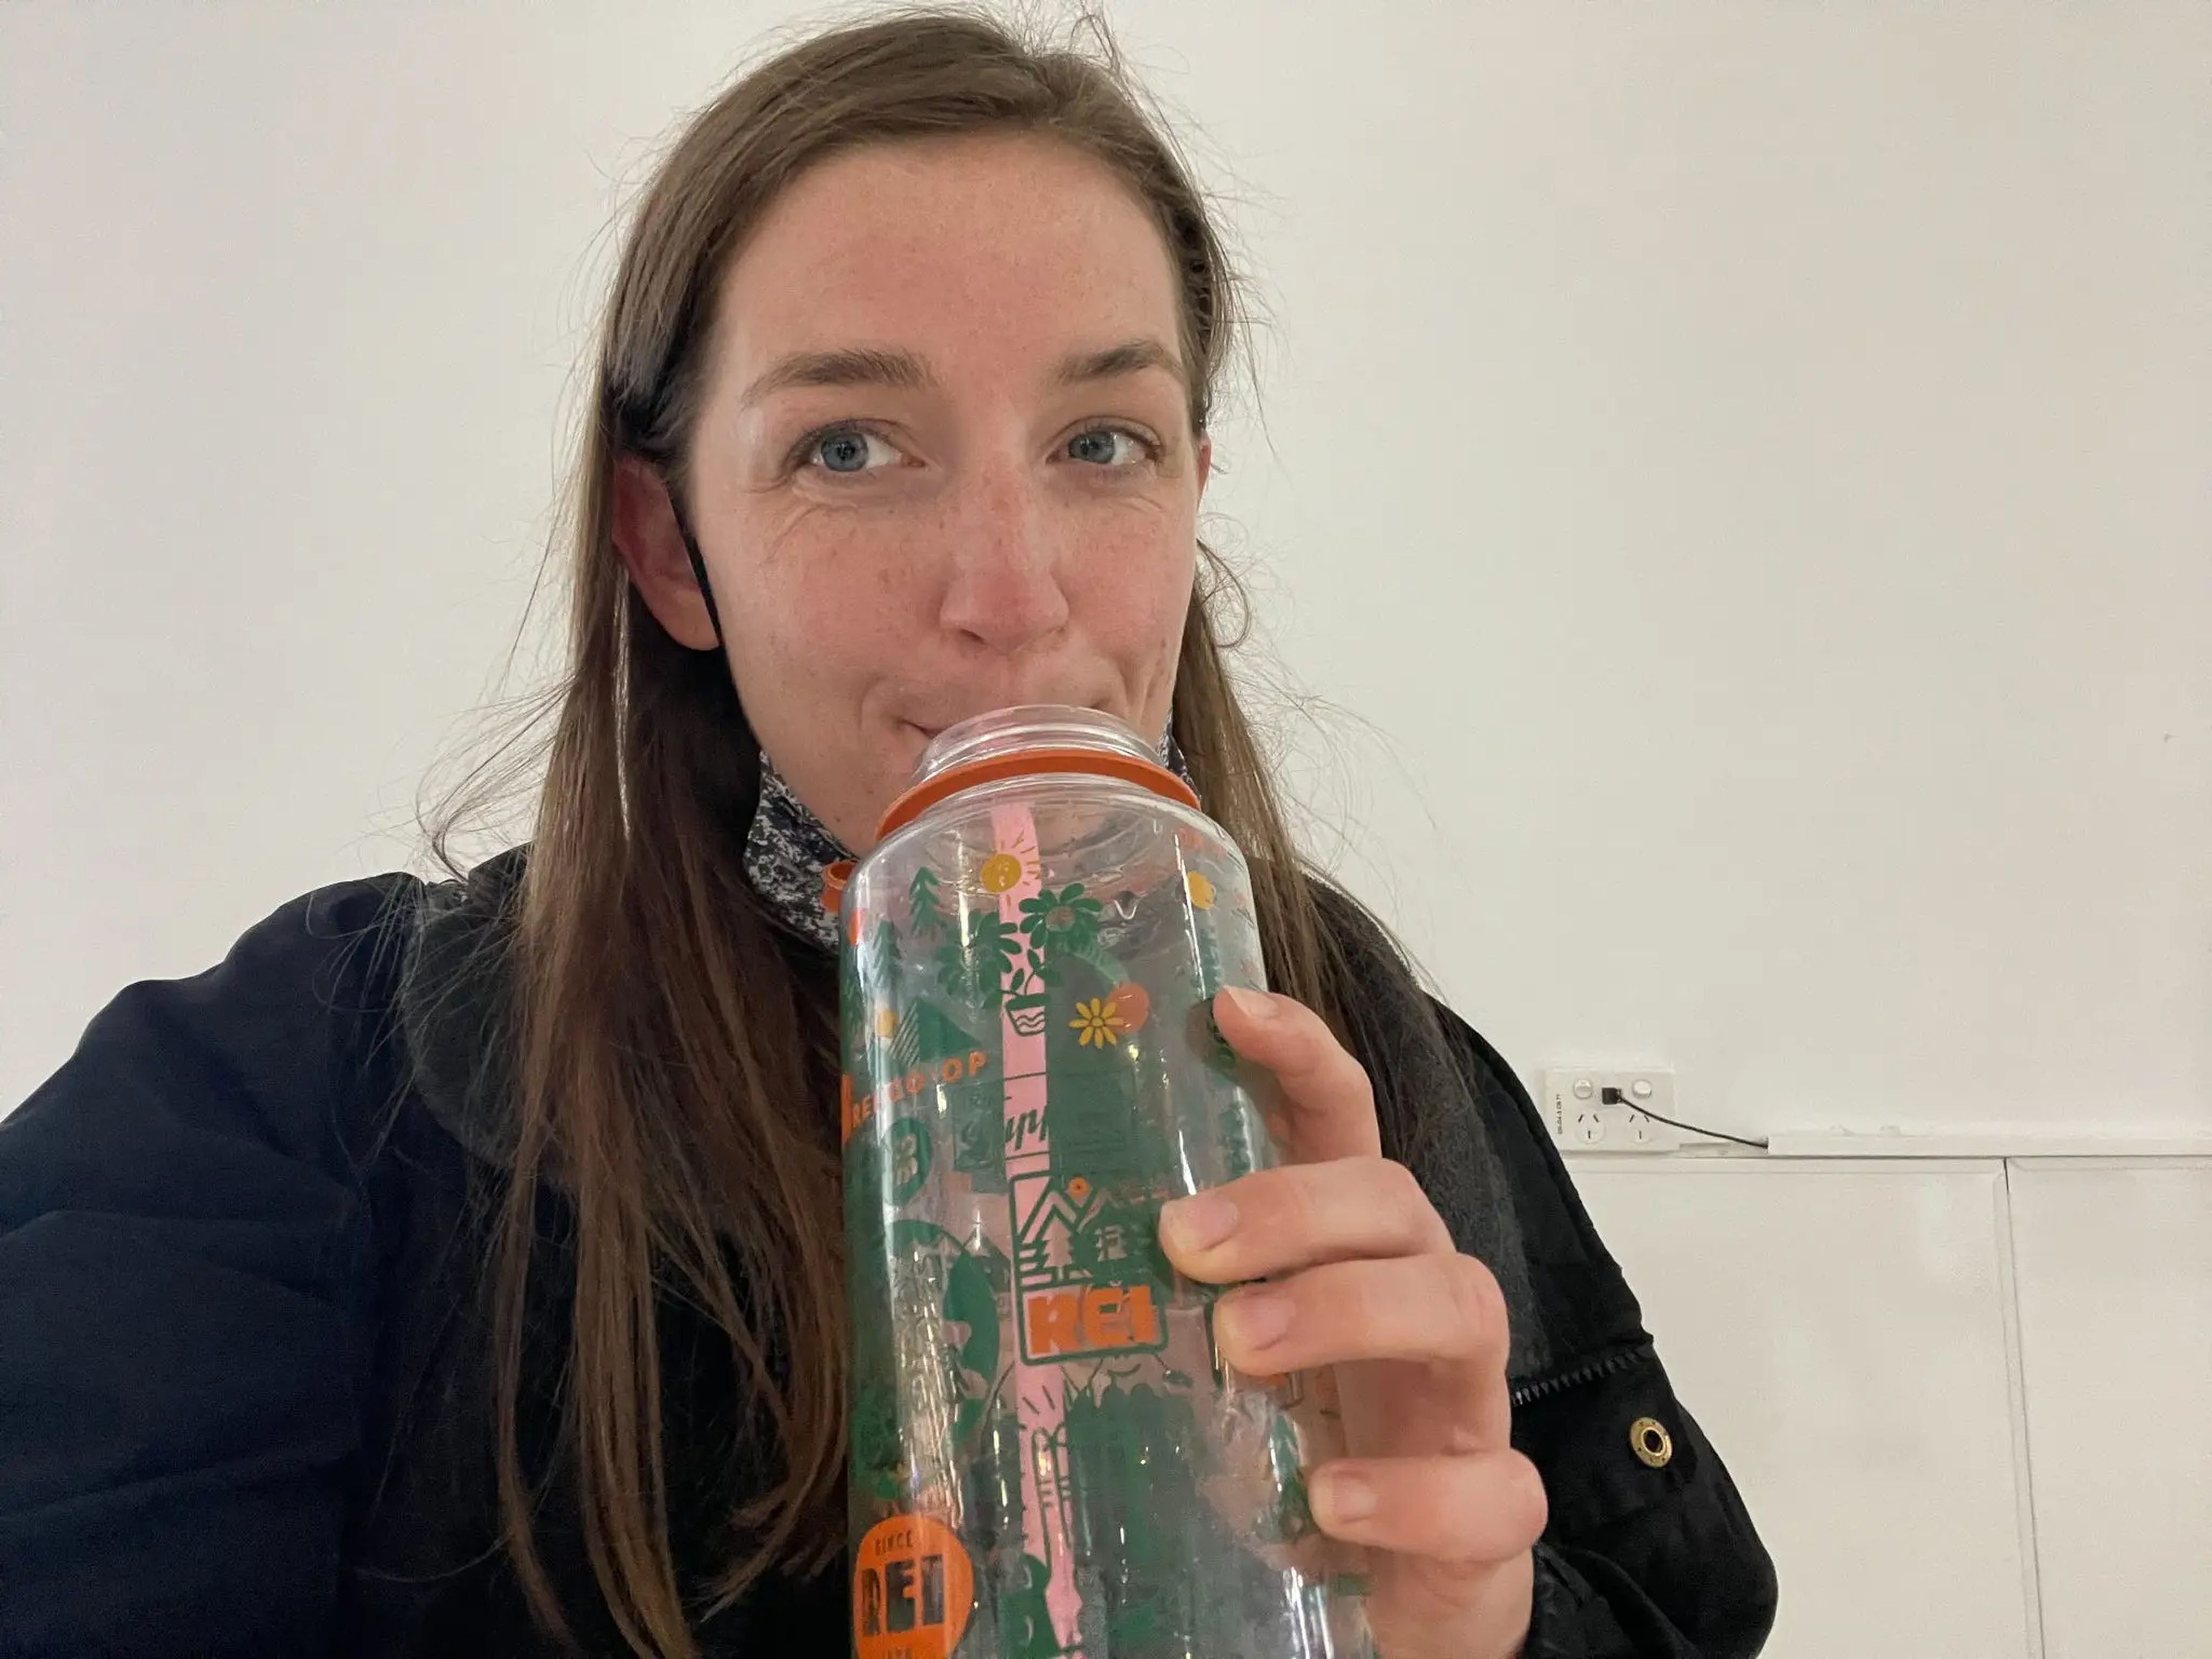 Insider's author drinks from a reusable water bottle.